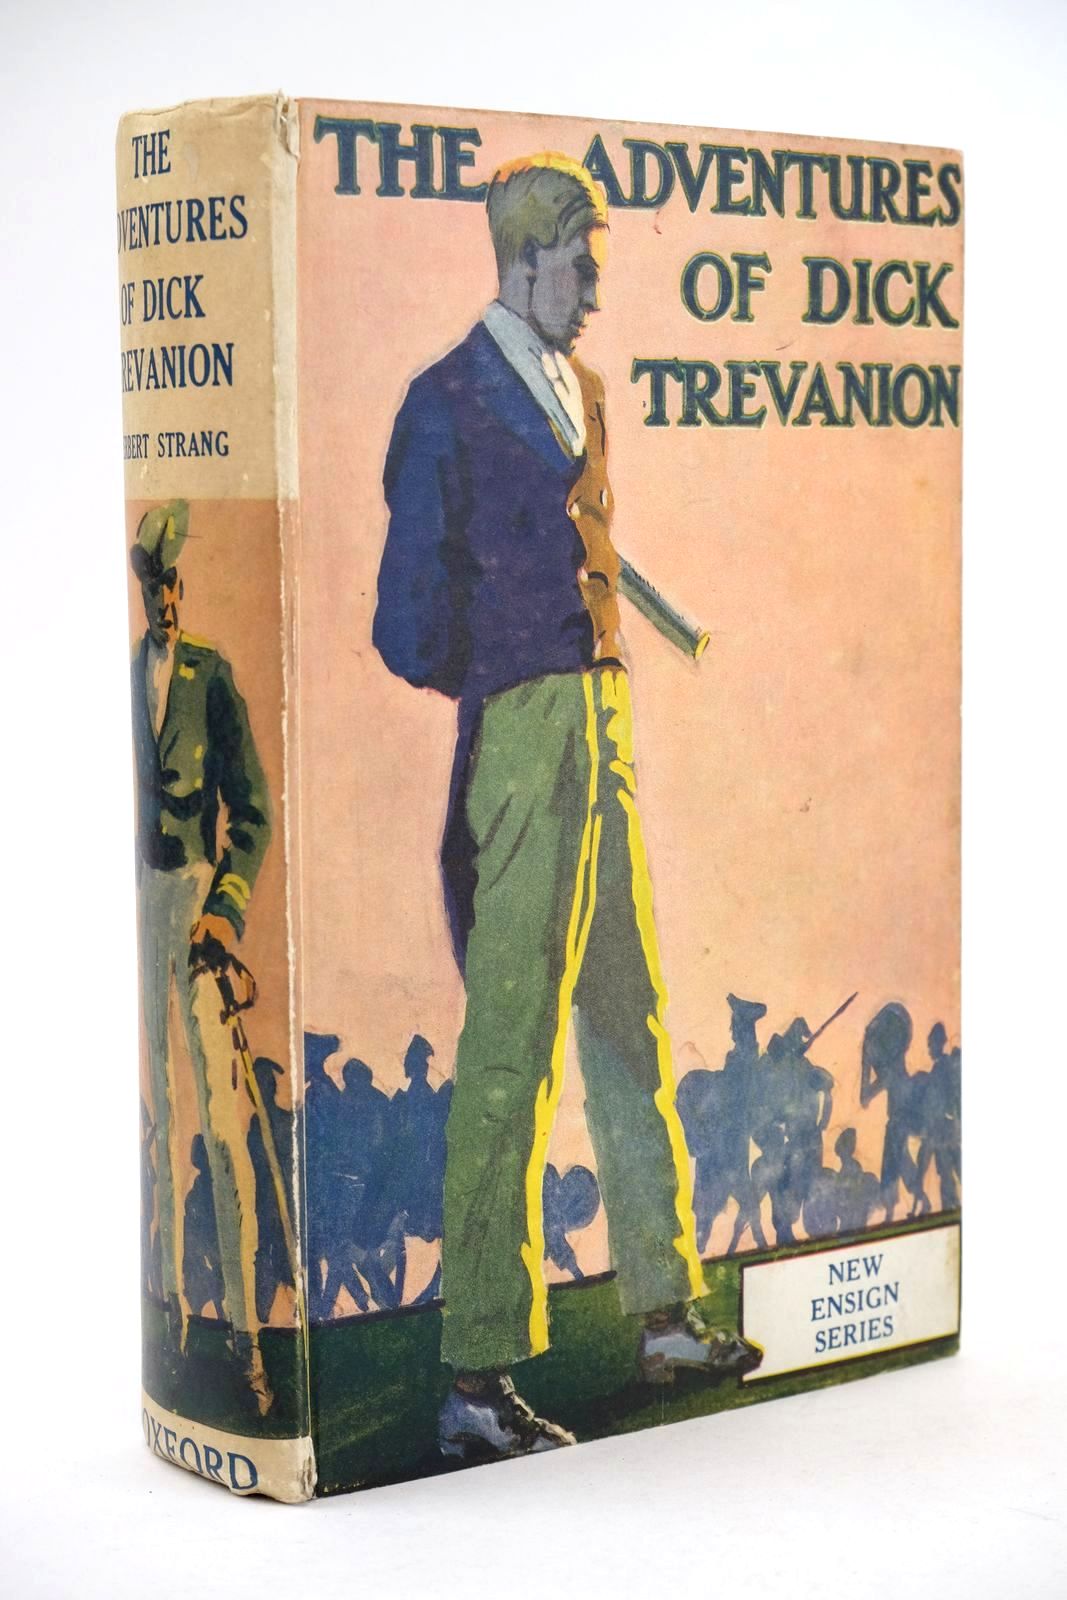 Photo of THE ADVENTURES OF DICK TREVANION written by Strang, Herbert published by Oxford University Press (STOCK CODE: 1325222)  for sale by Stella & Rose's Books